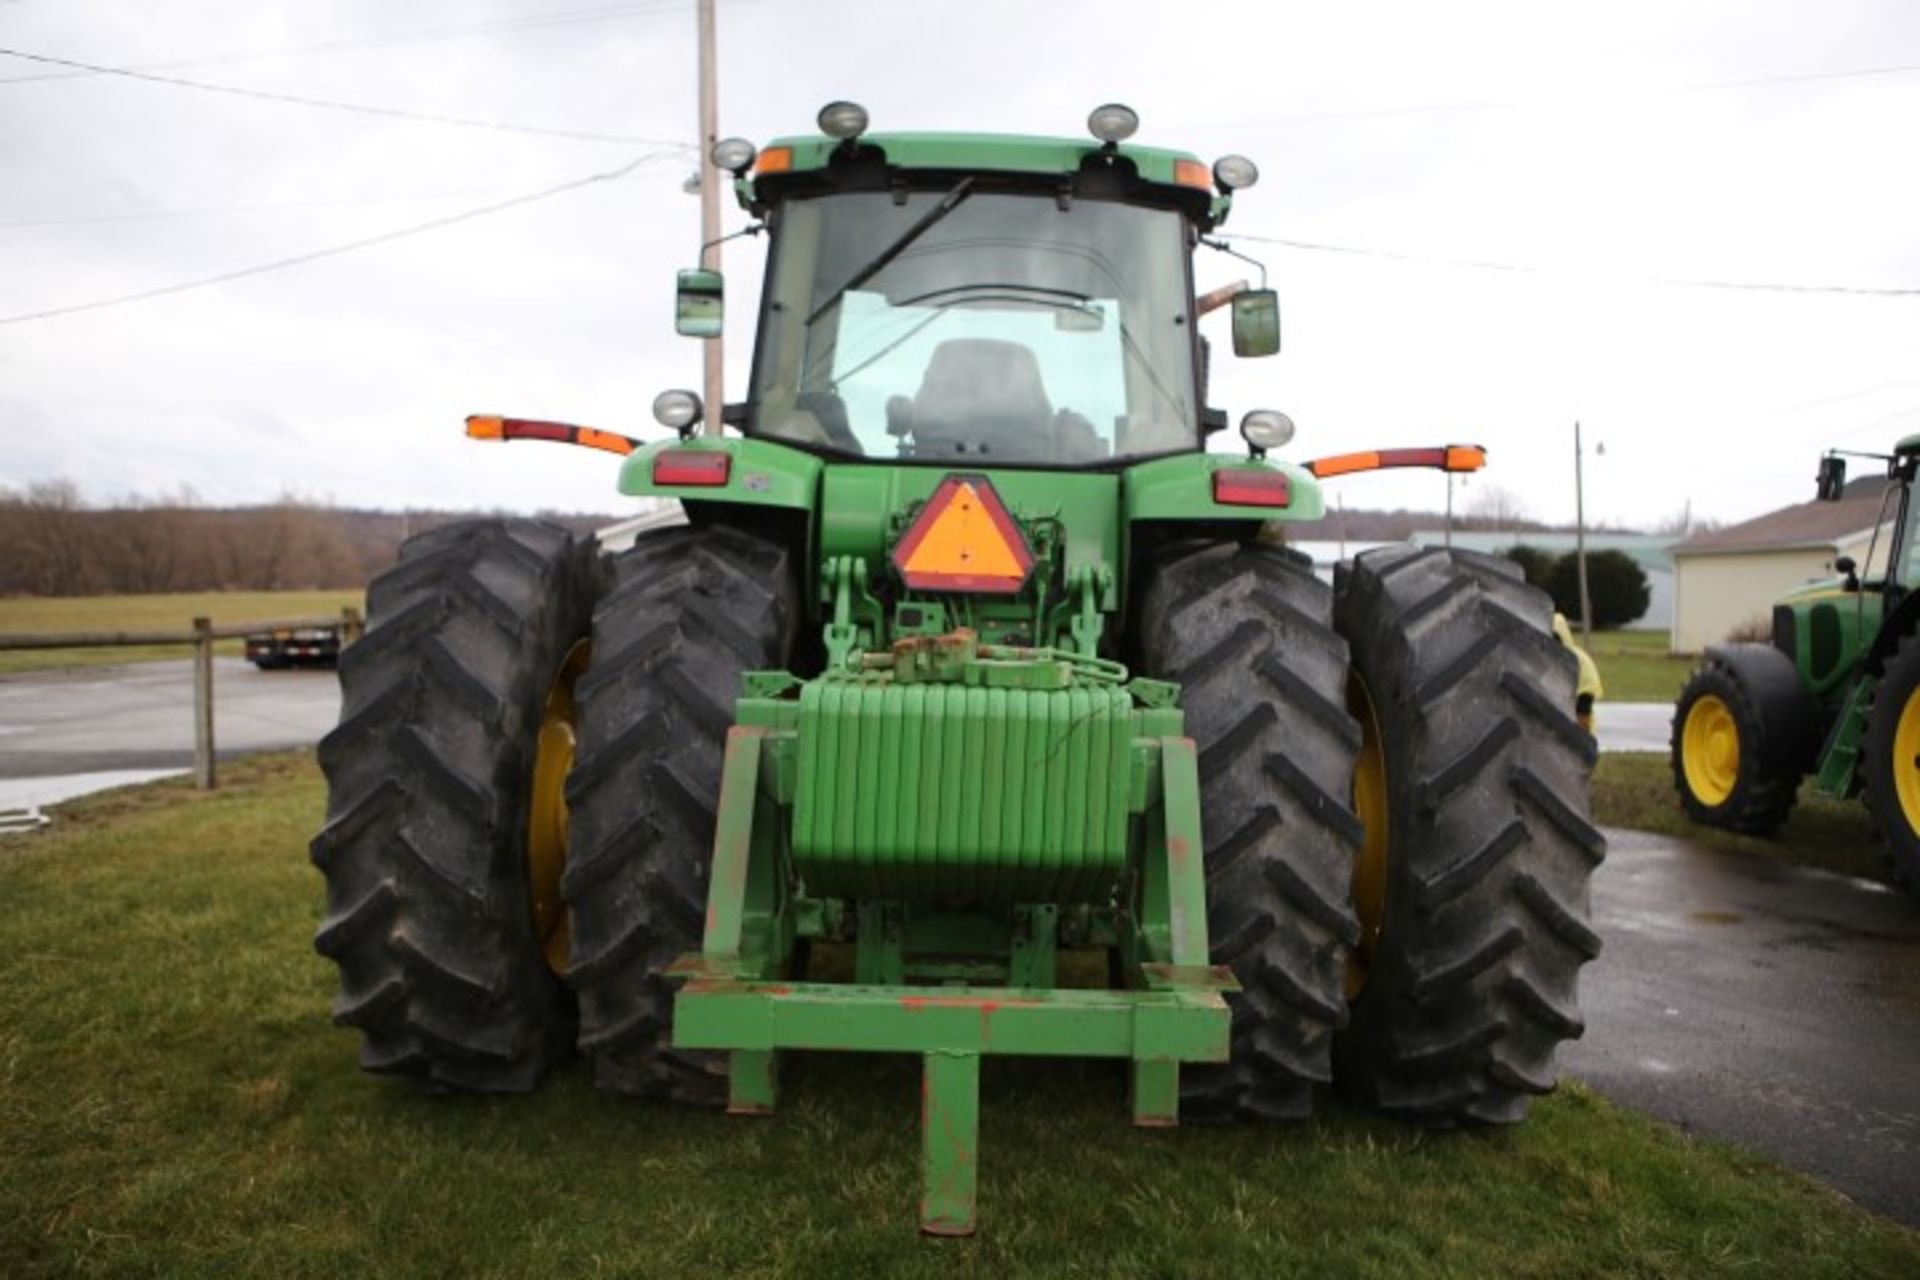 05 JD 7920 W/GROUSER 2100 12' SILAGE BLADE, 4WD, 4,500 HRS, W/ 20.8R42 DUALS, IVT,REVERSER, REAR - Image 3 of 12